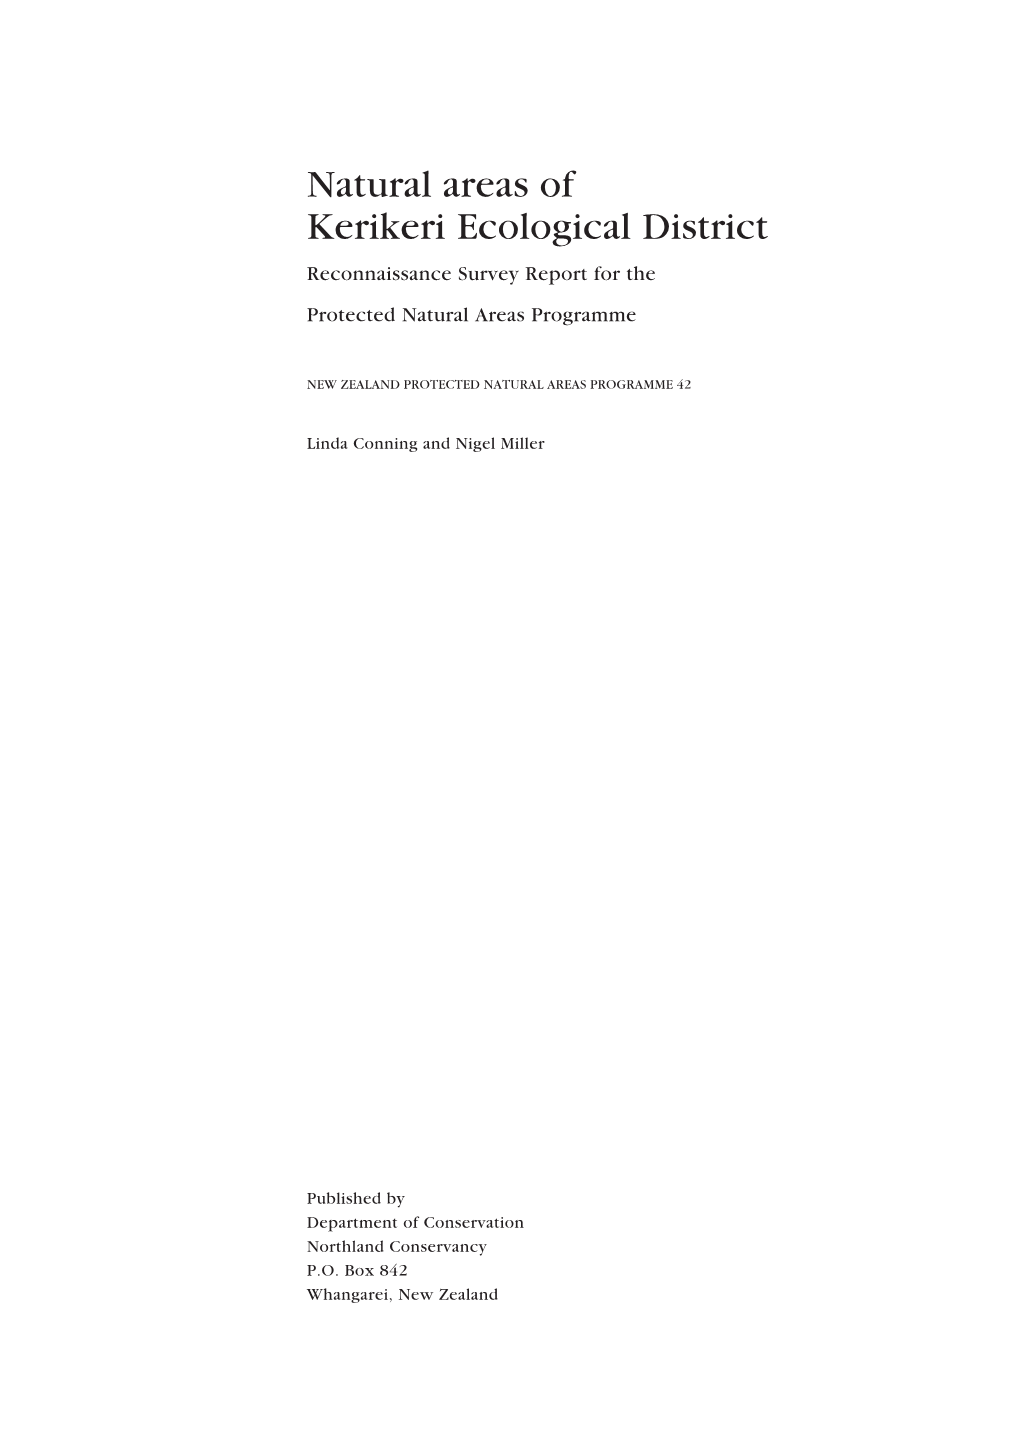 Natural Areas of Kerikeri Ecological District Reconnaissance Survey Report for the Protected Natural Areas Programme